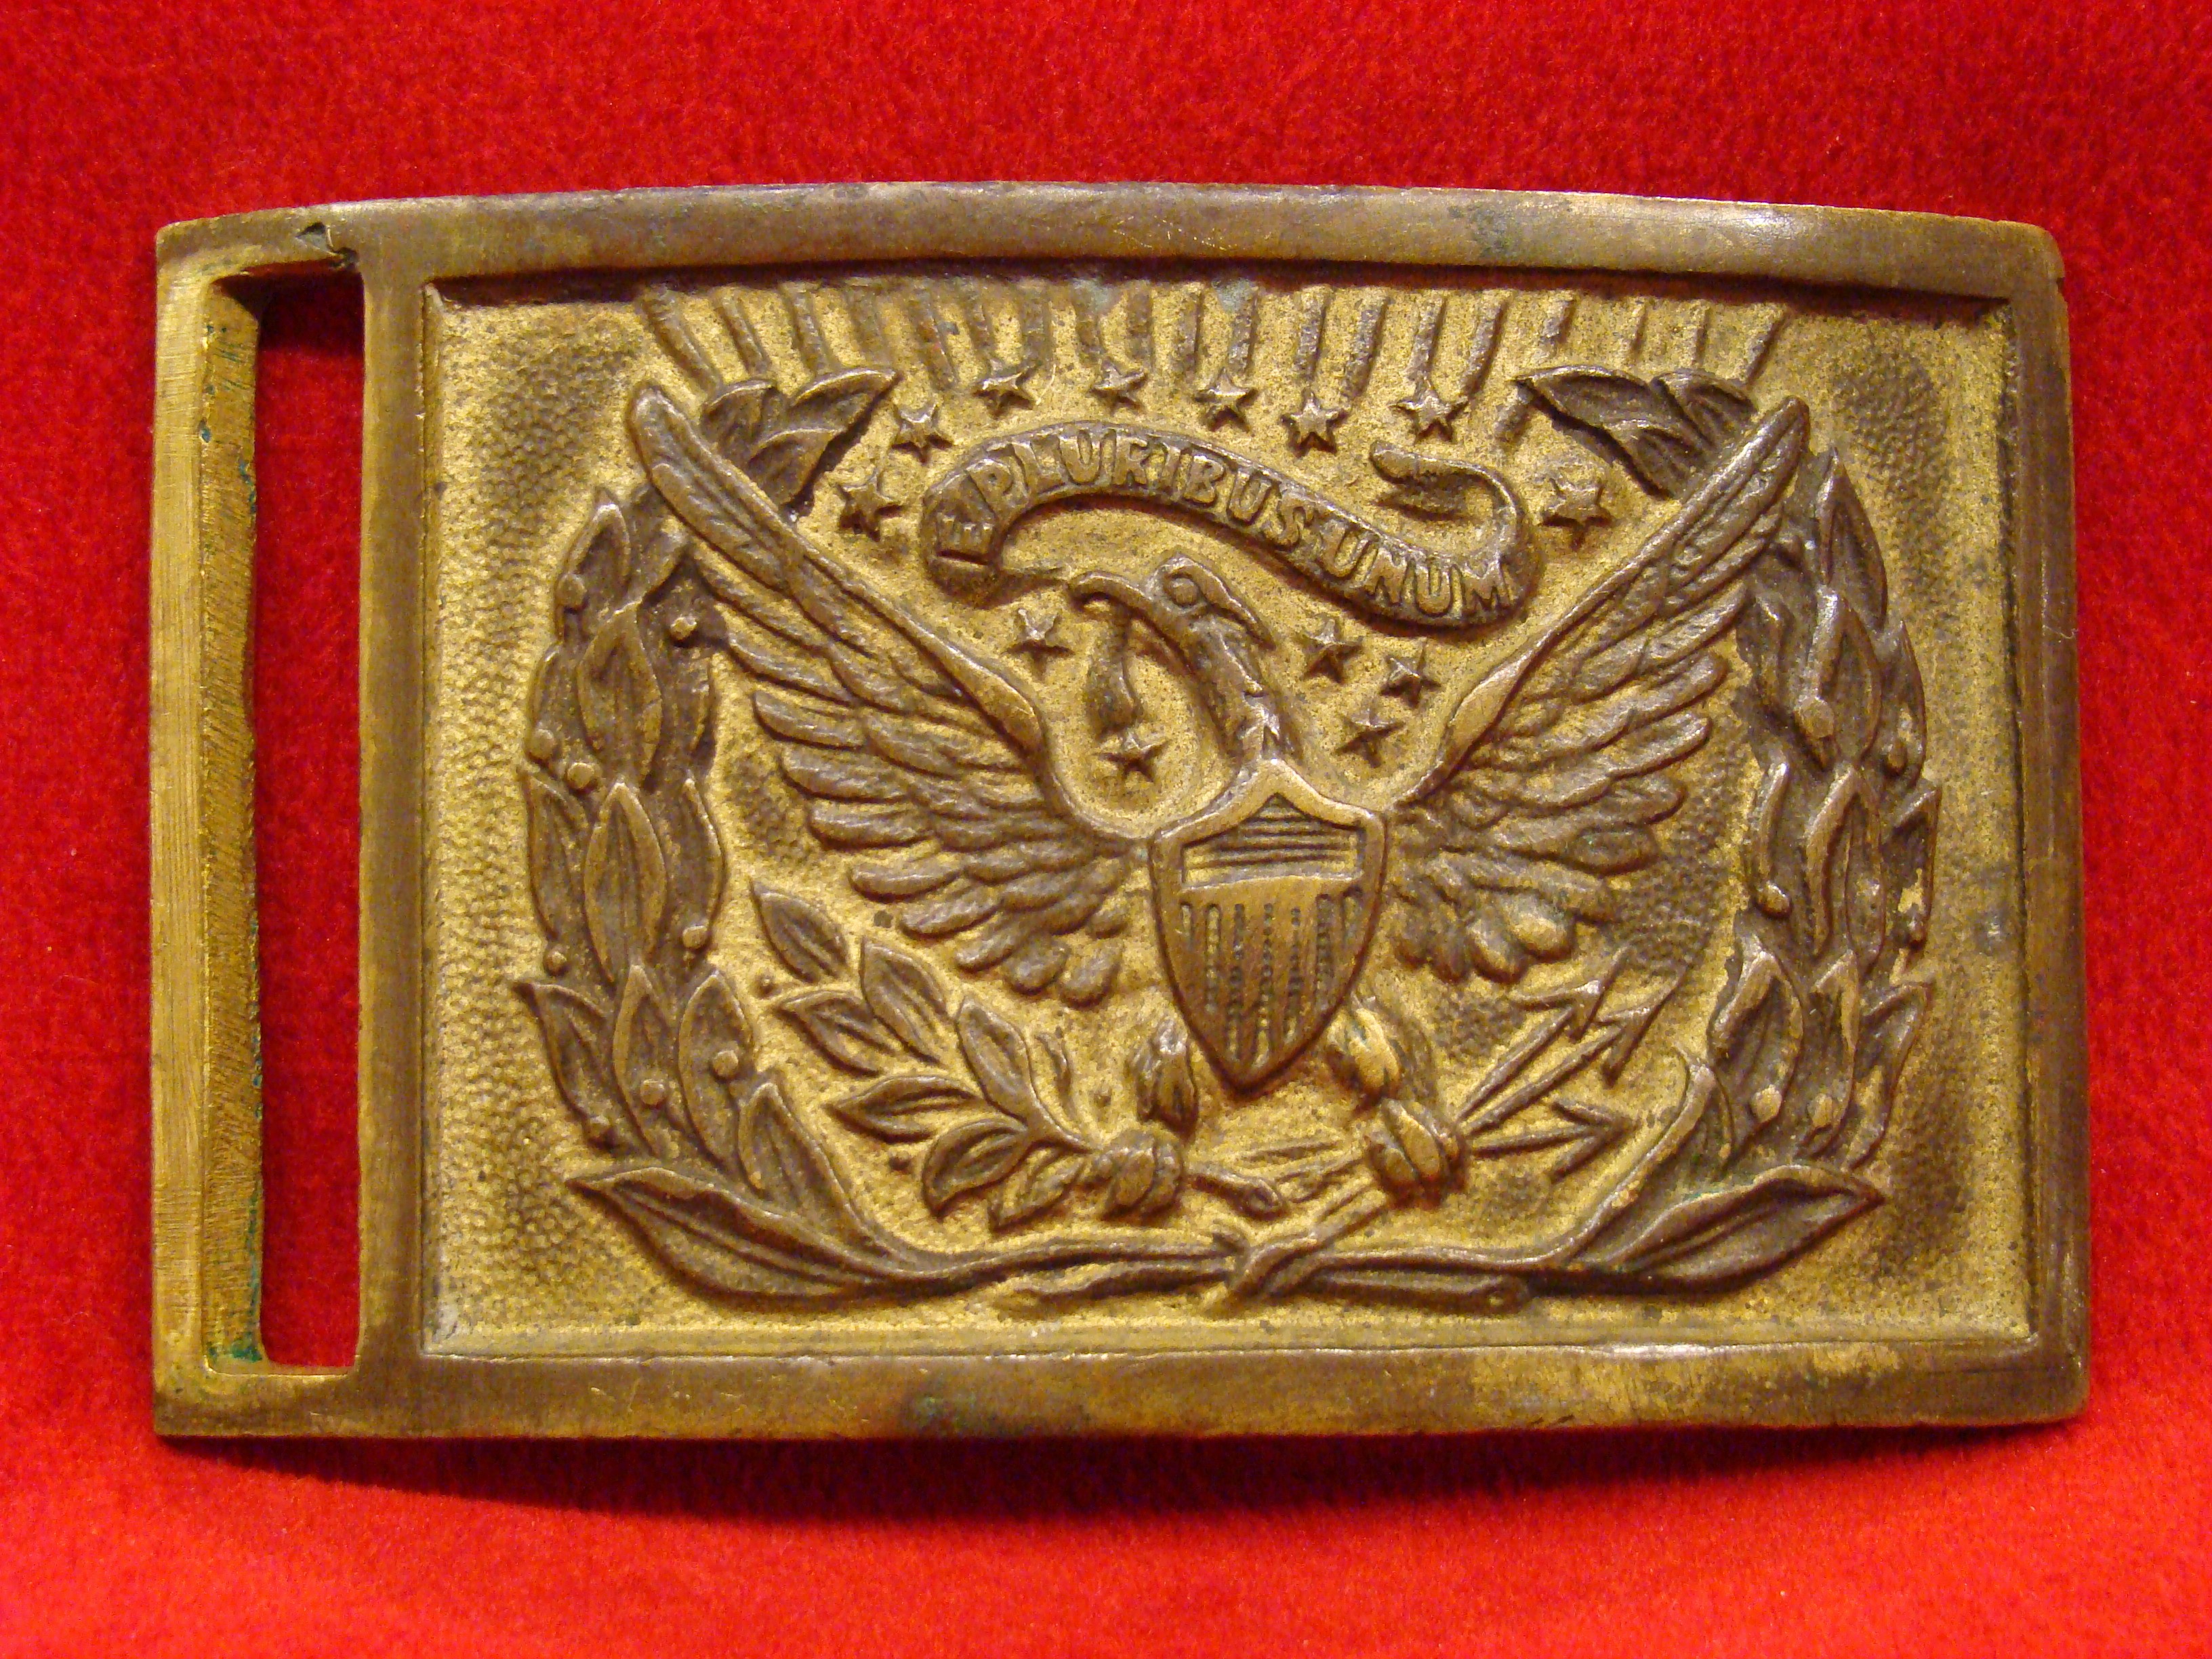 Union Buckles and Plates - Army of Tennessee Relics  Confederate Belt  Buckles, Artillery, Buttons, all Authentic Civil War Relics